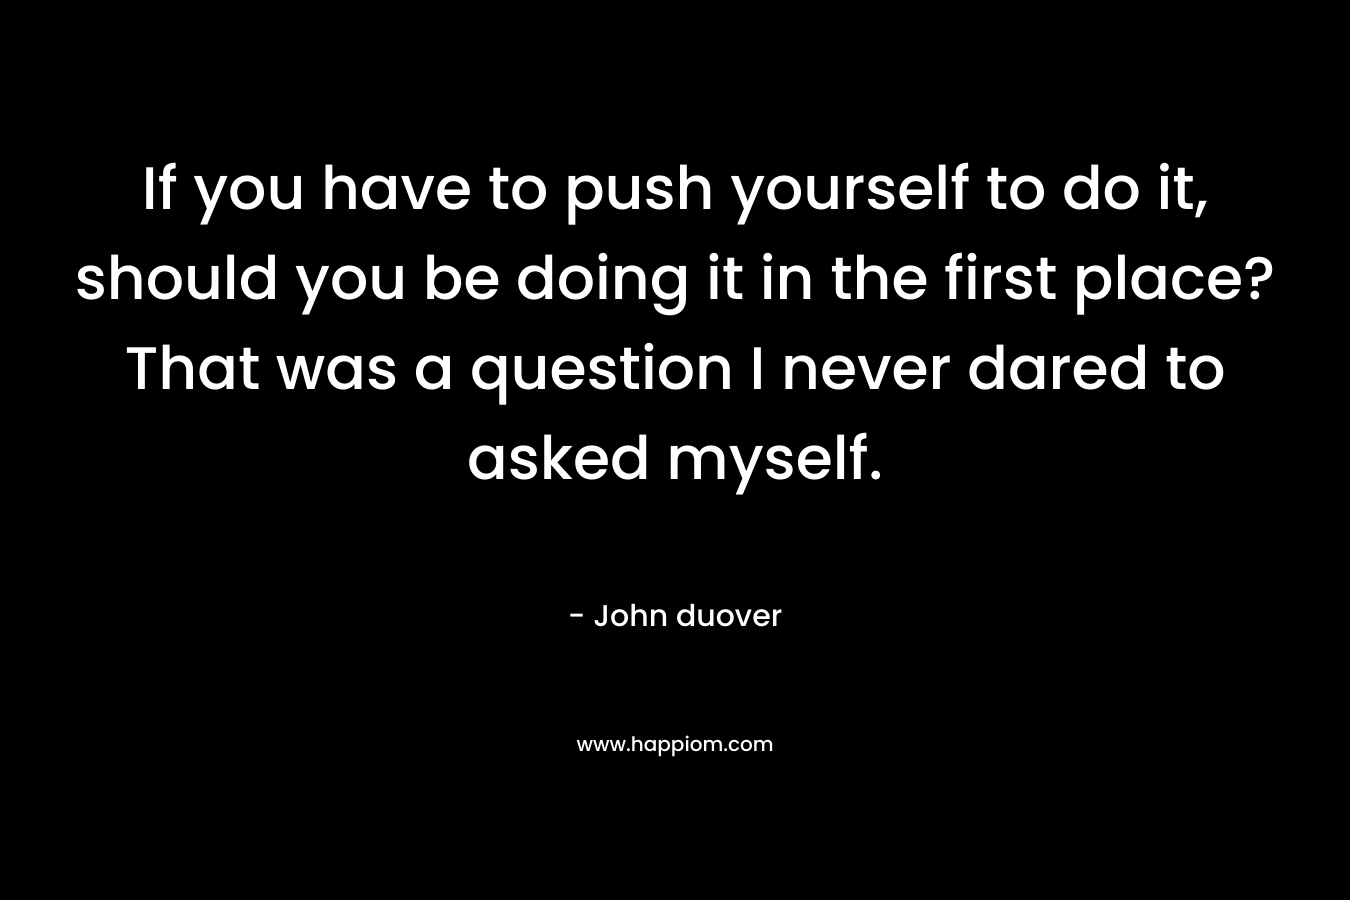 If you have to push yourself to do it, should you be doing it in the first place? That was a question I never dared to asked myself.